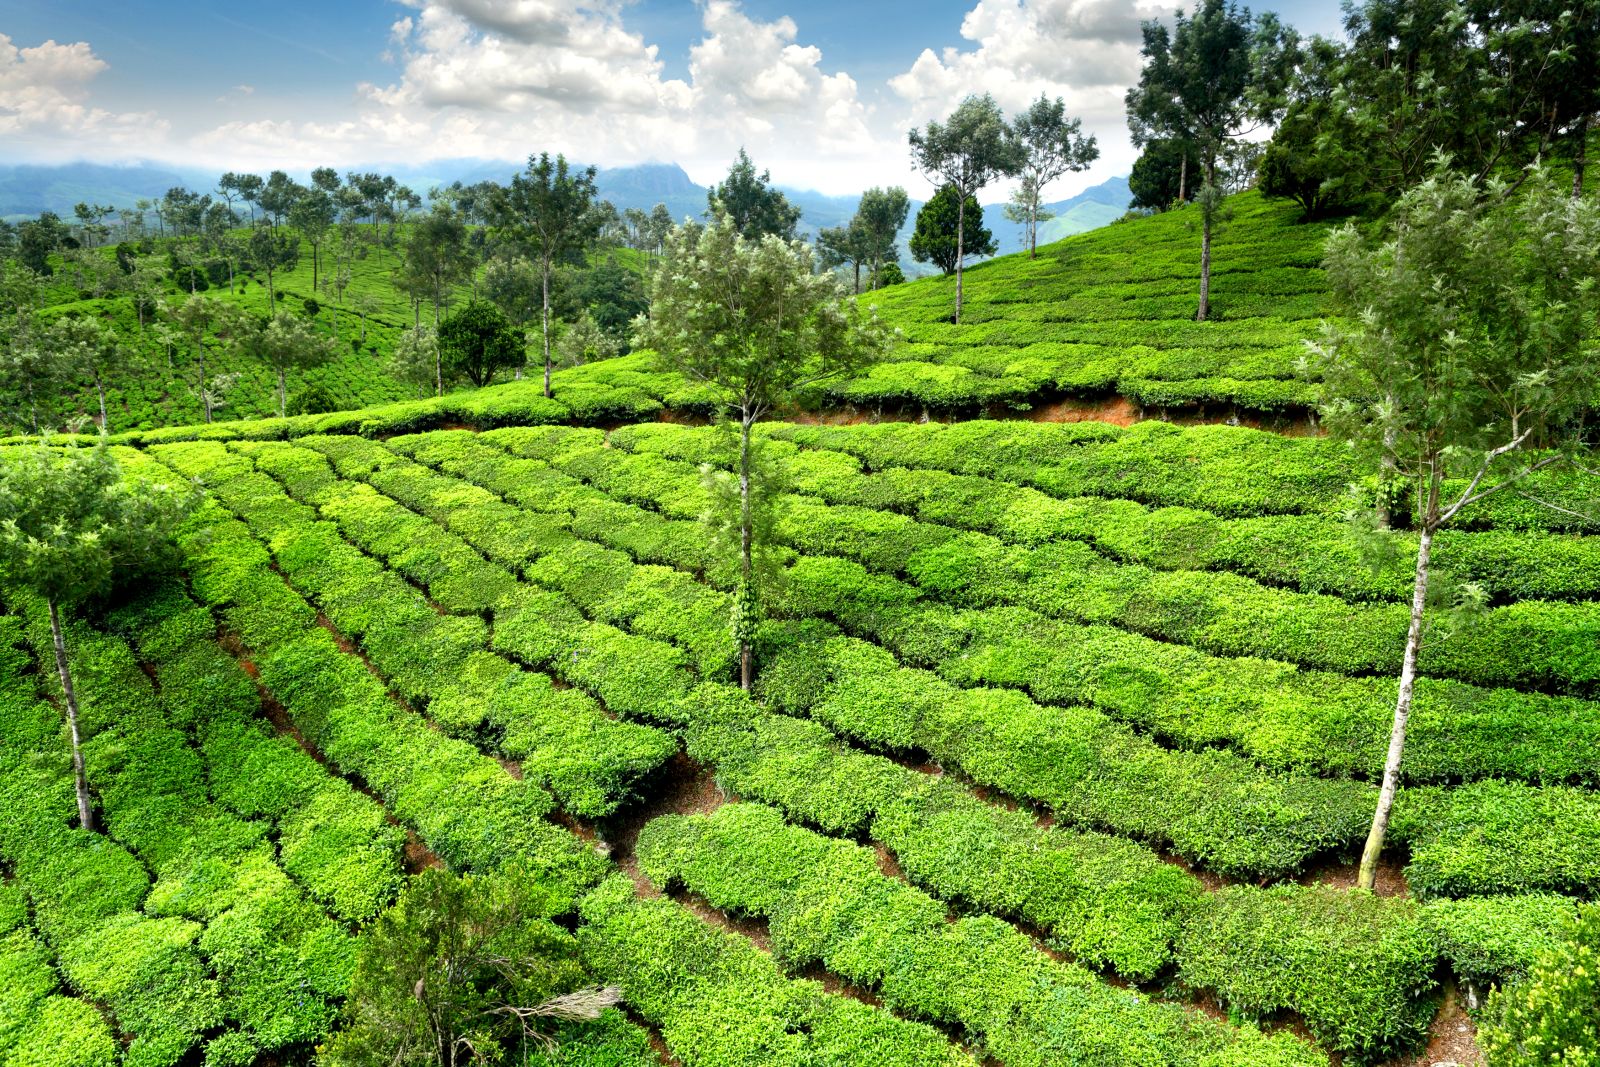 View of the lush green hills of tea plantations in Kerala south India